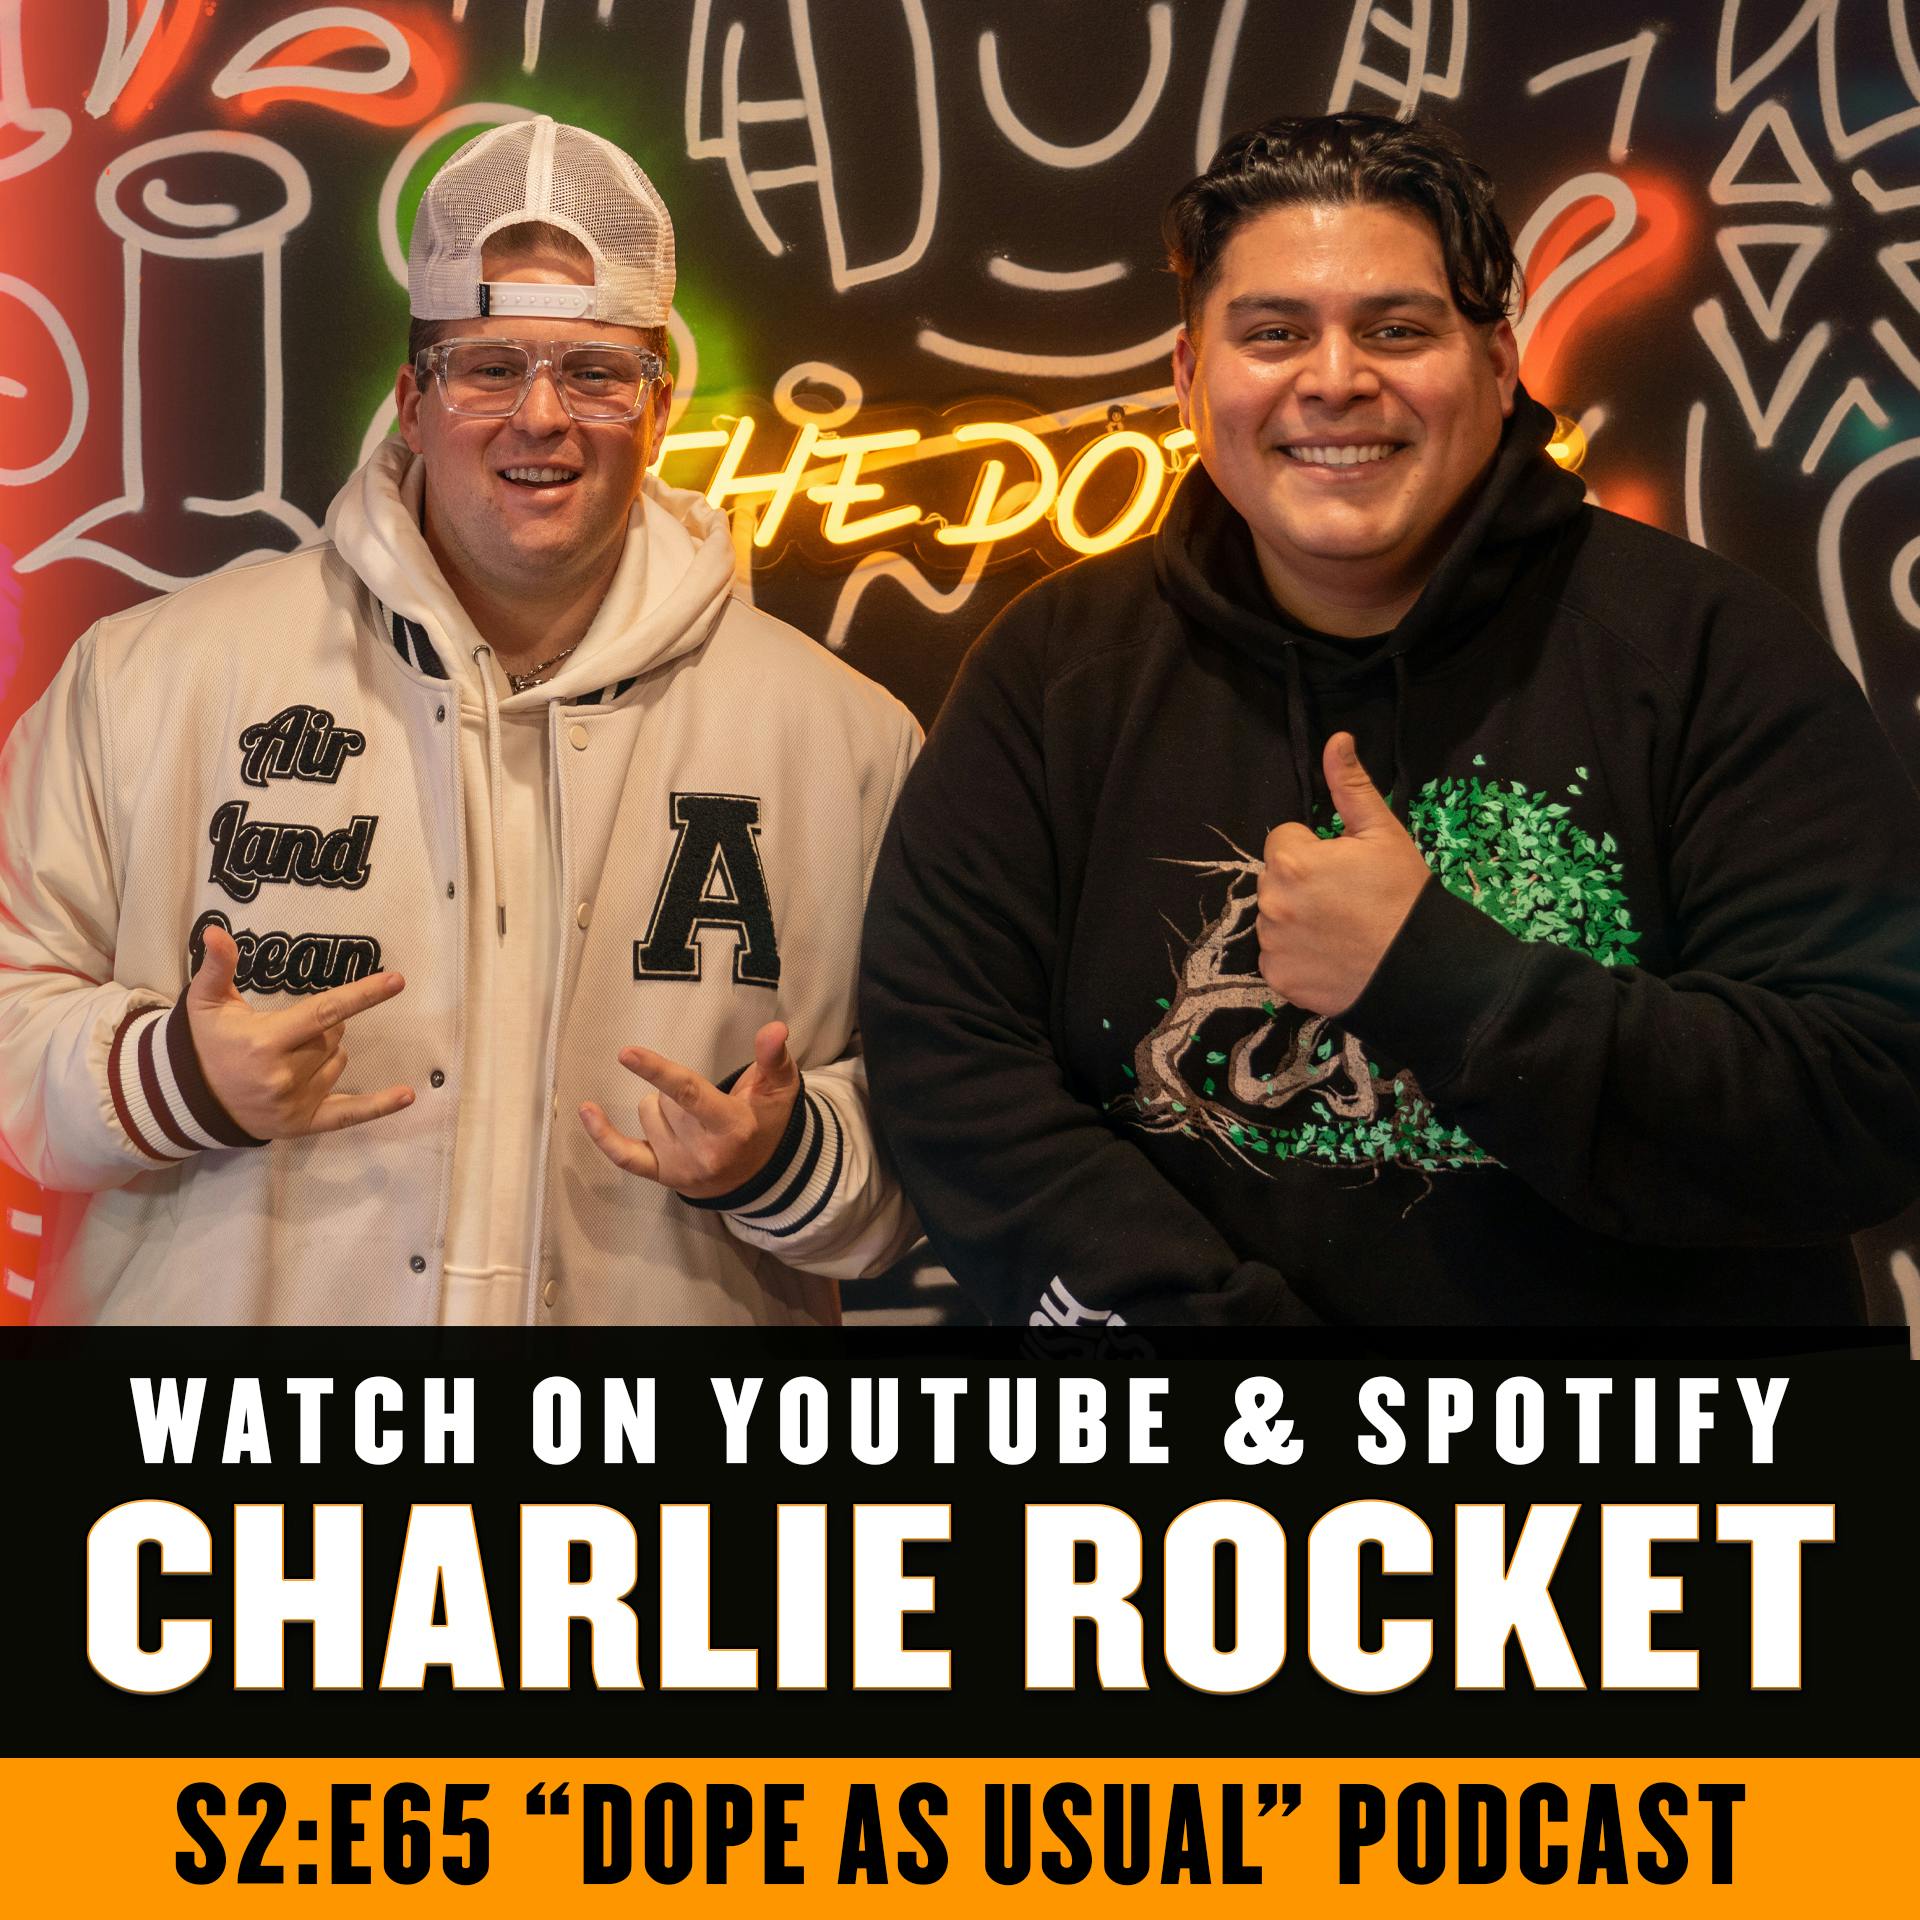 The Charlie Rocket Episode | Hosted by Dope as Yola